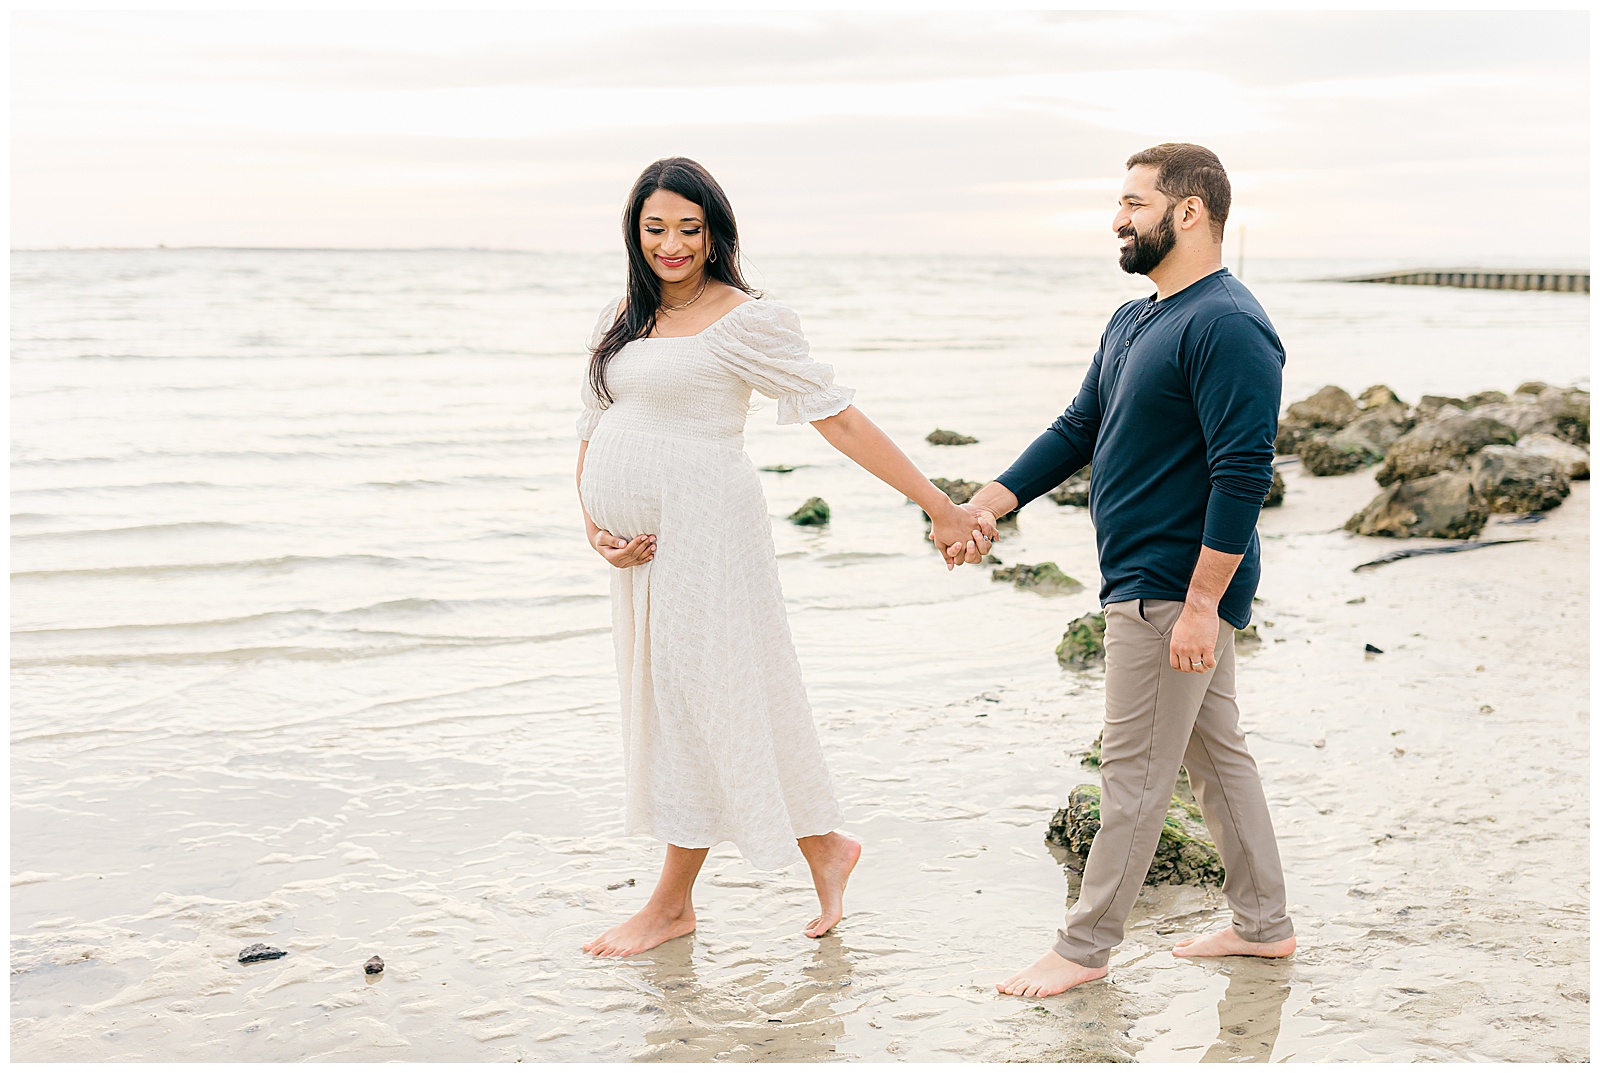 What to wear for Maternity Photos